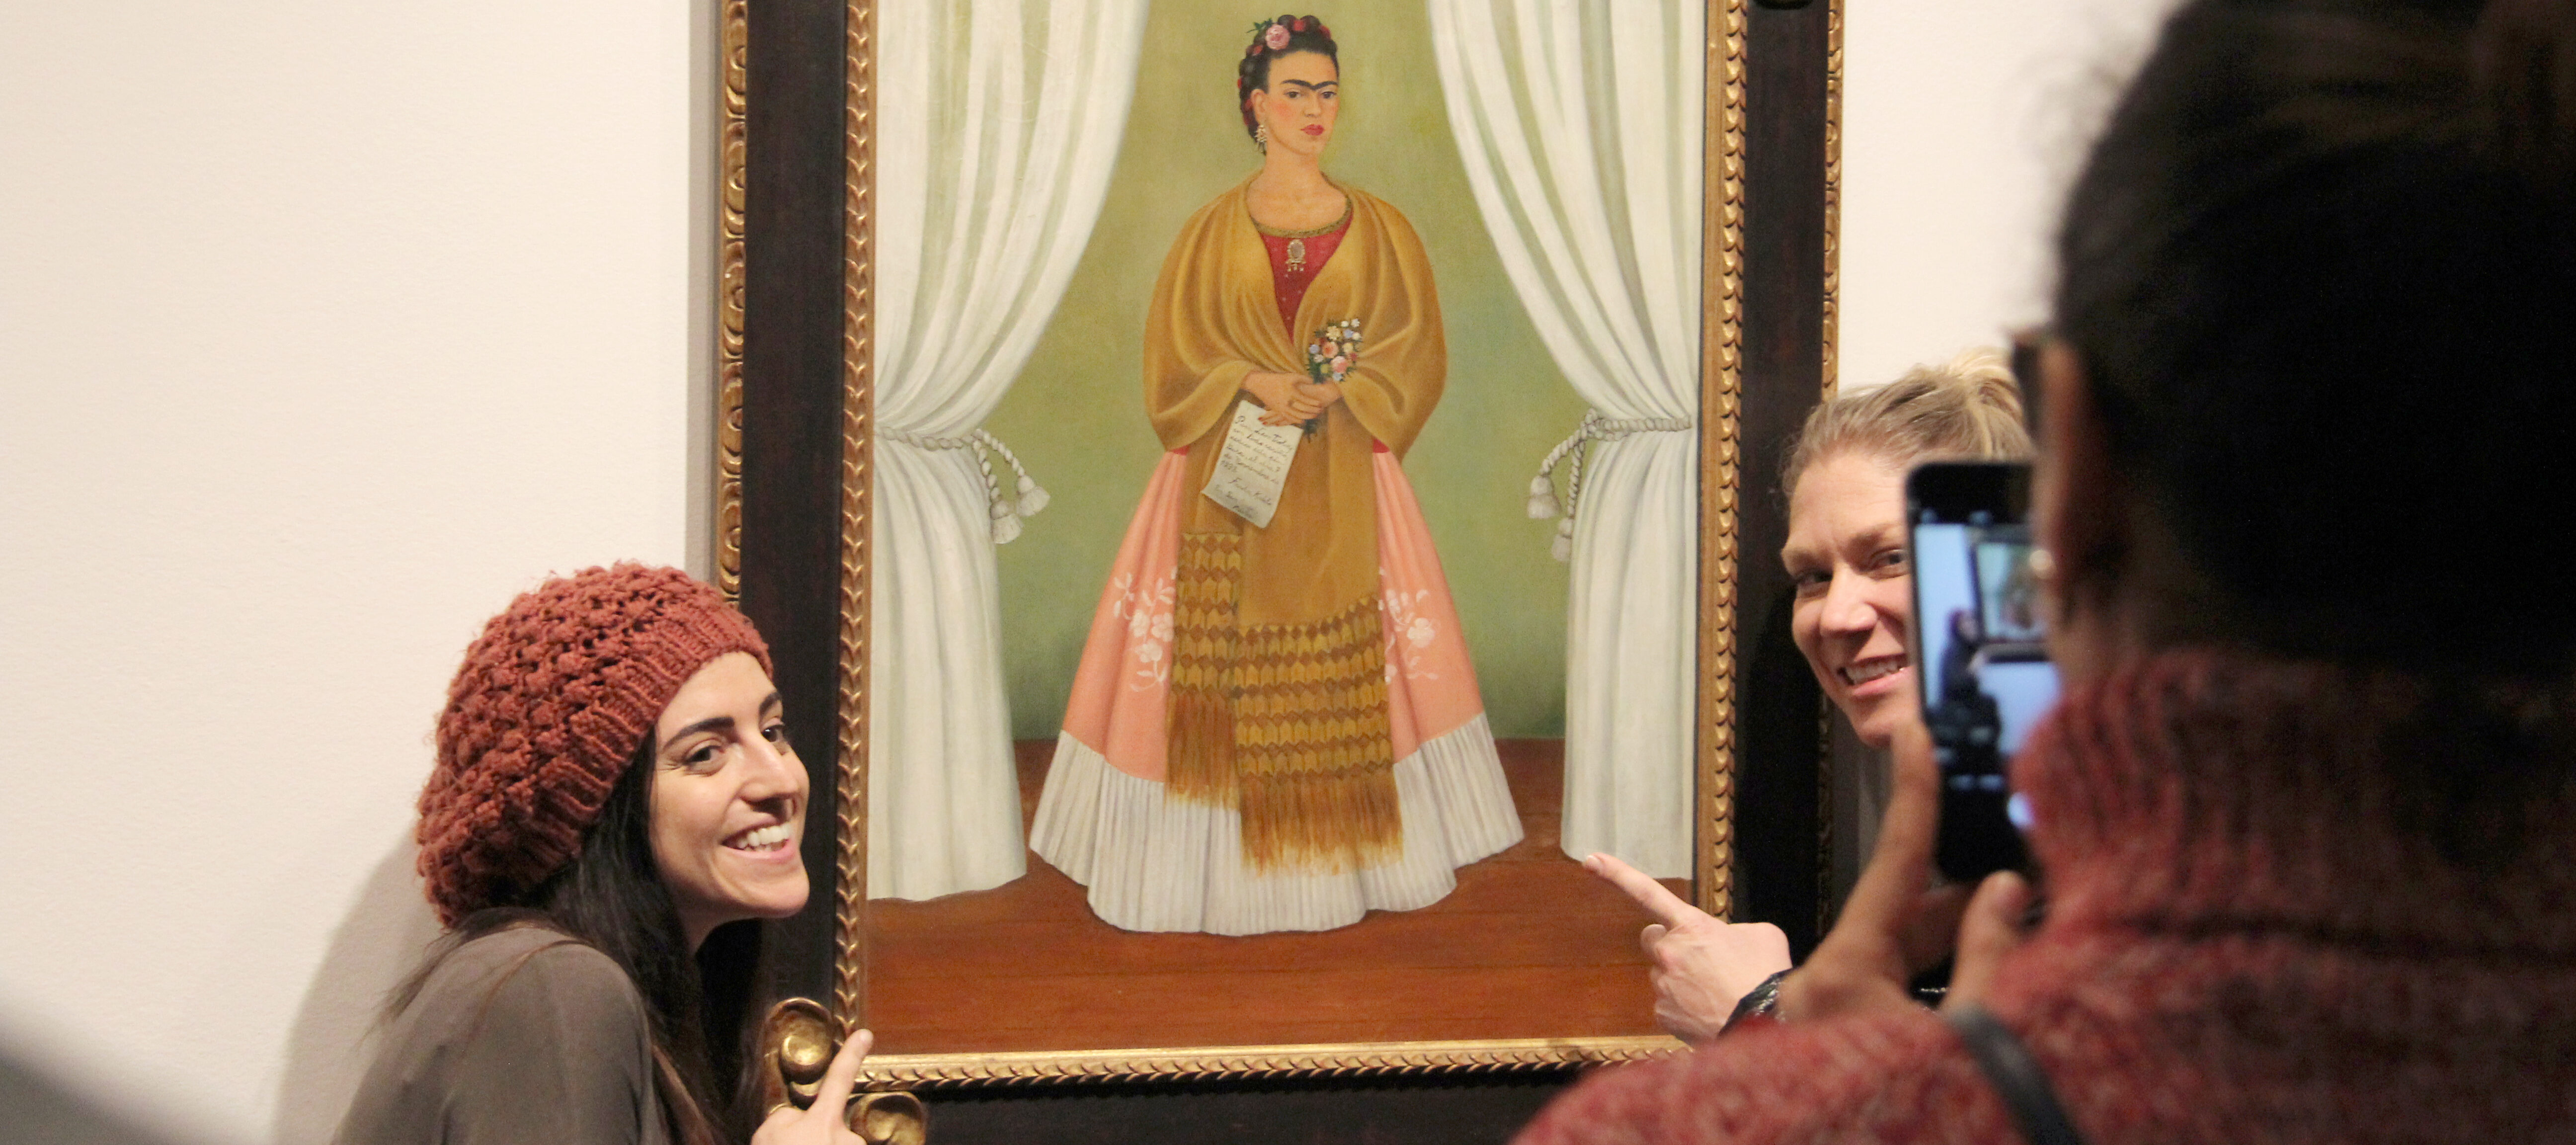 Two light-skinned adults posing for a photo with a painted self-portrait of Frida Kahlo. They are grinning and pointing at the painting, while another person takes their photo on a smartphone.